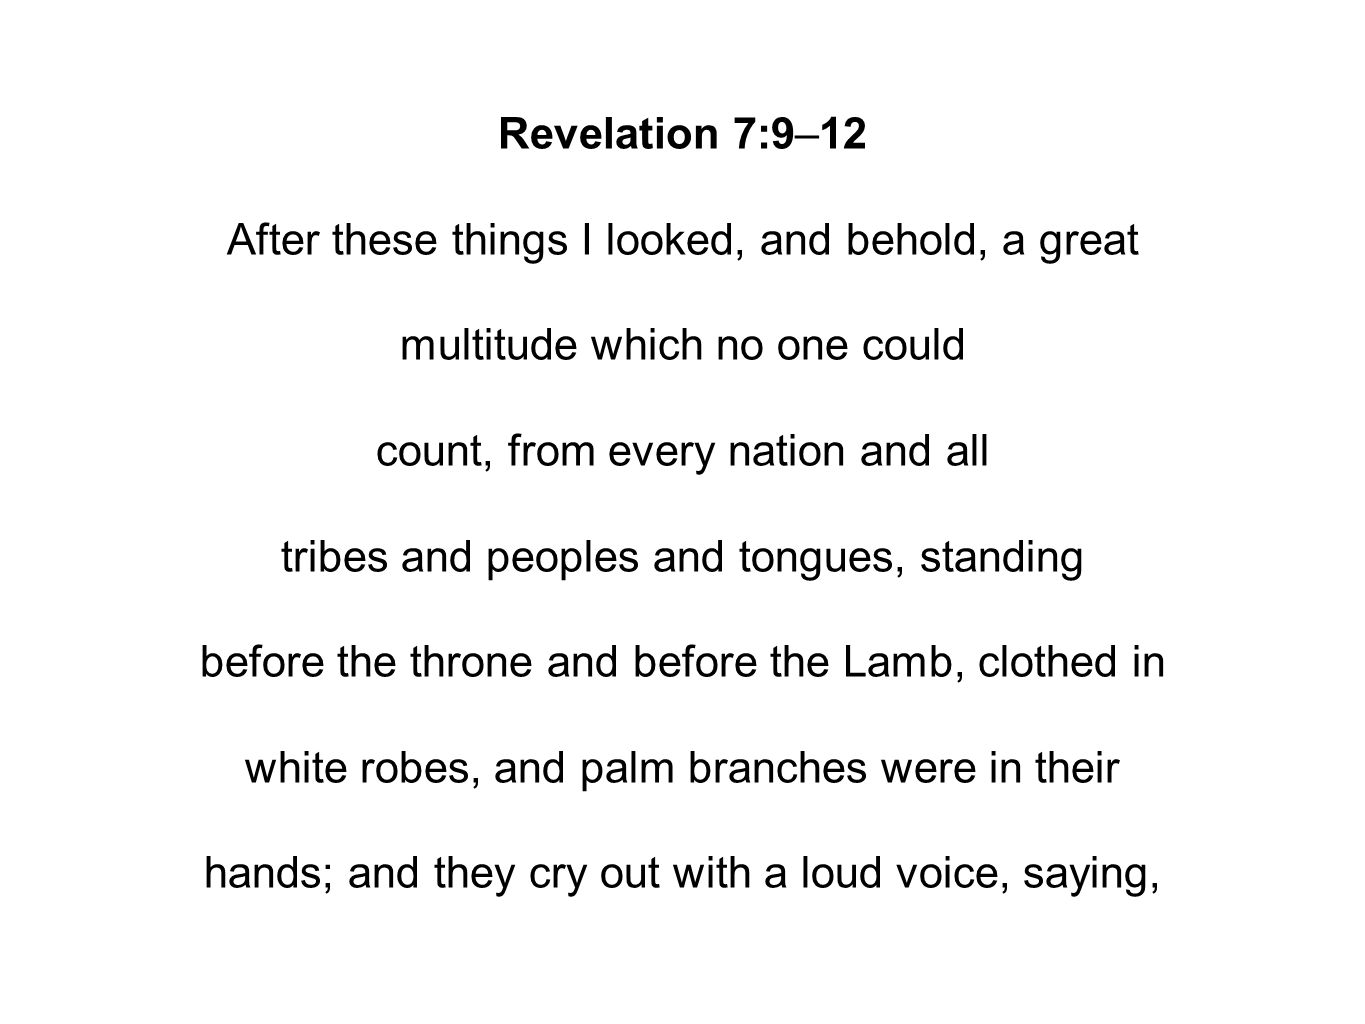 Revelation 7:9–12 After these things I looked, and behold, a great multitude which no one could count, from every nation and all tribes and peoples and tongues, standing before the throne and before the Lamb, clothed in white robes, and palm branches were in their hands; and they cry out with a loud voice, saying,